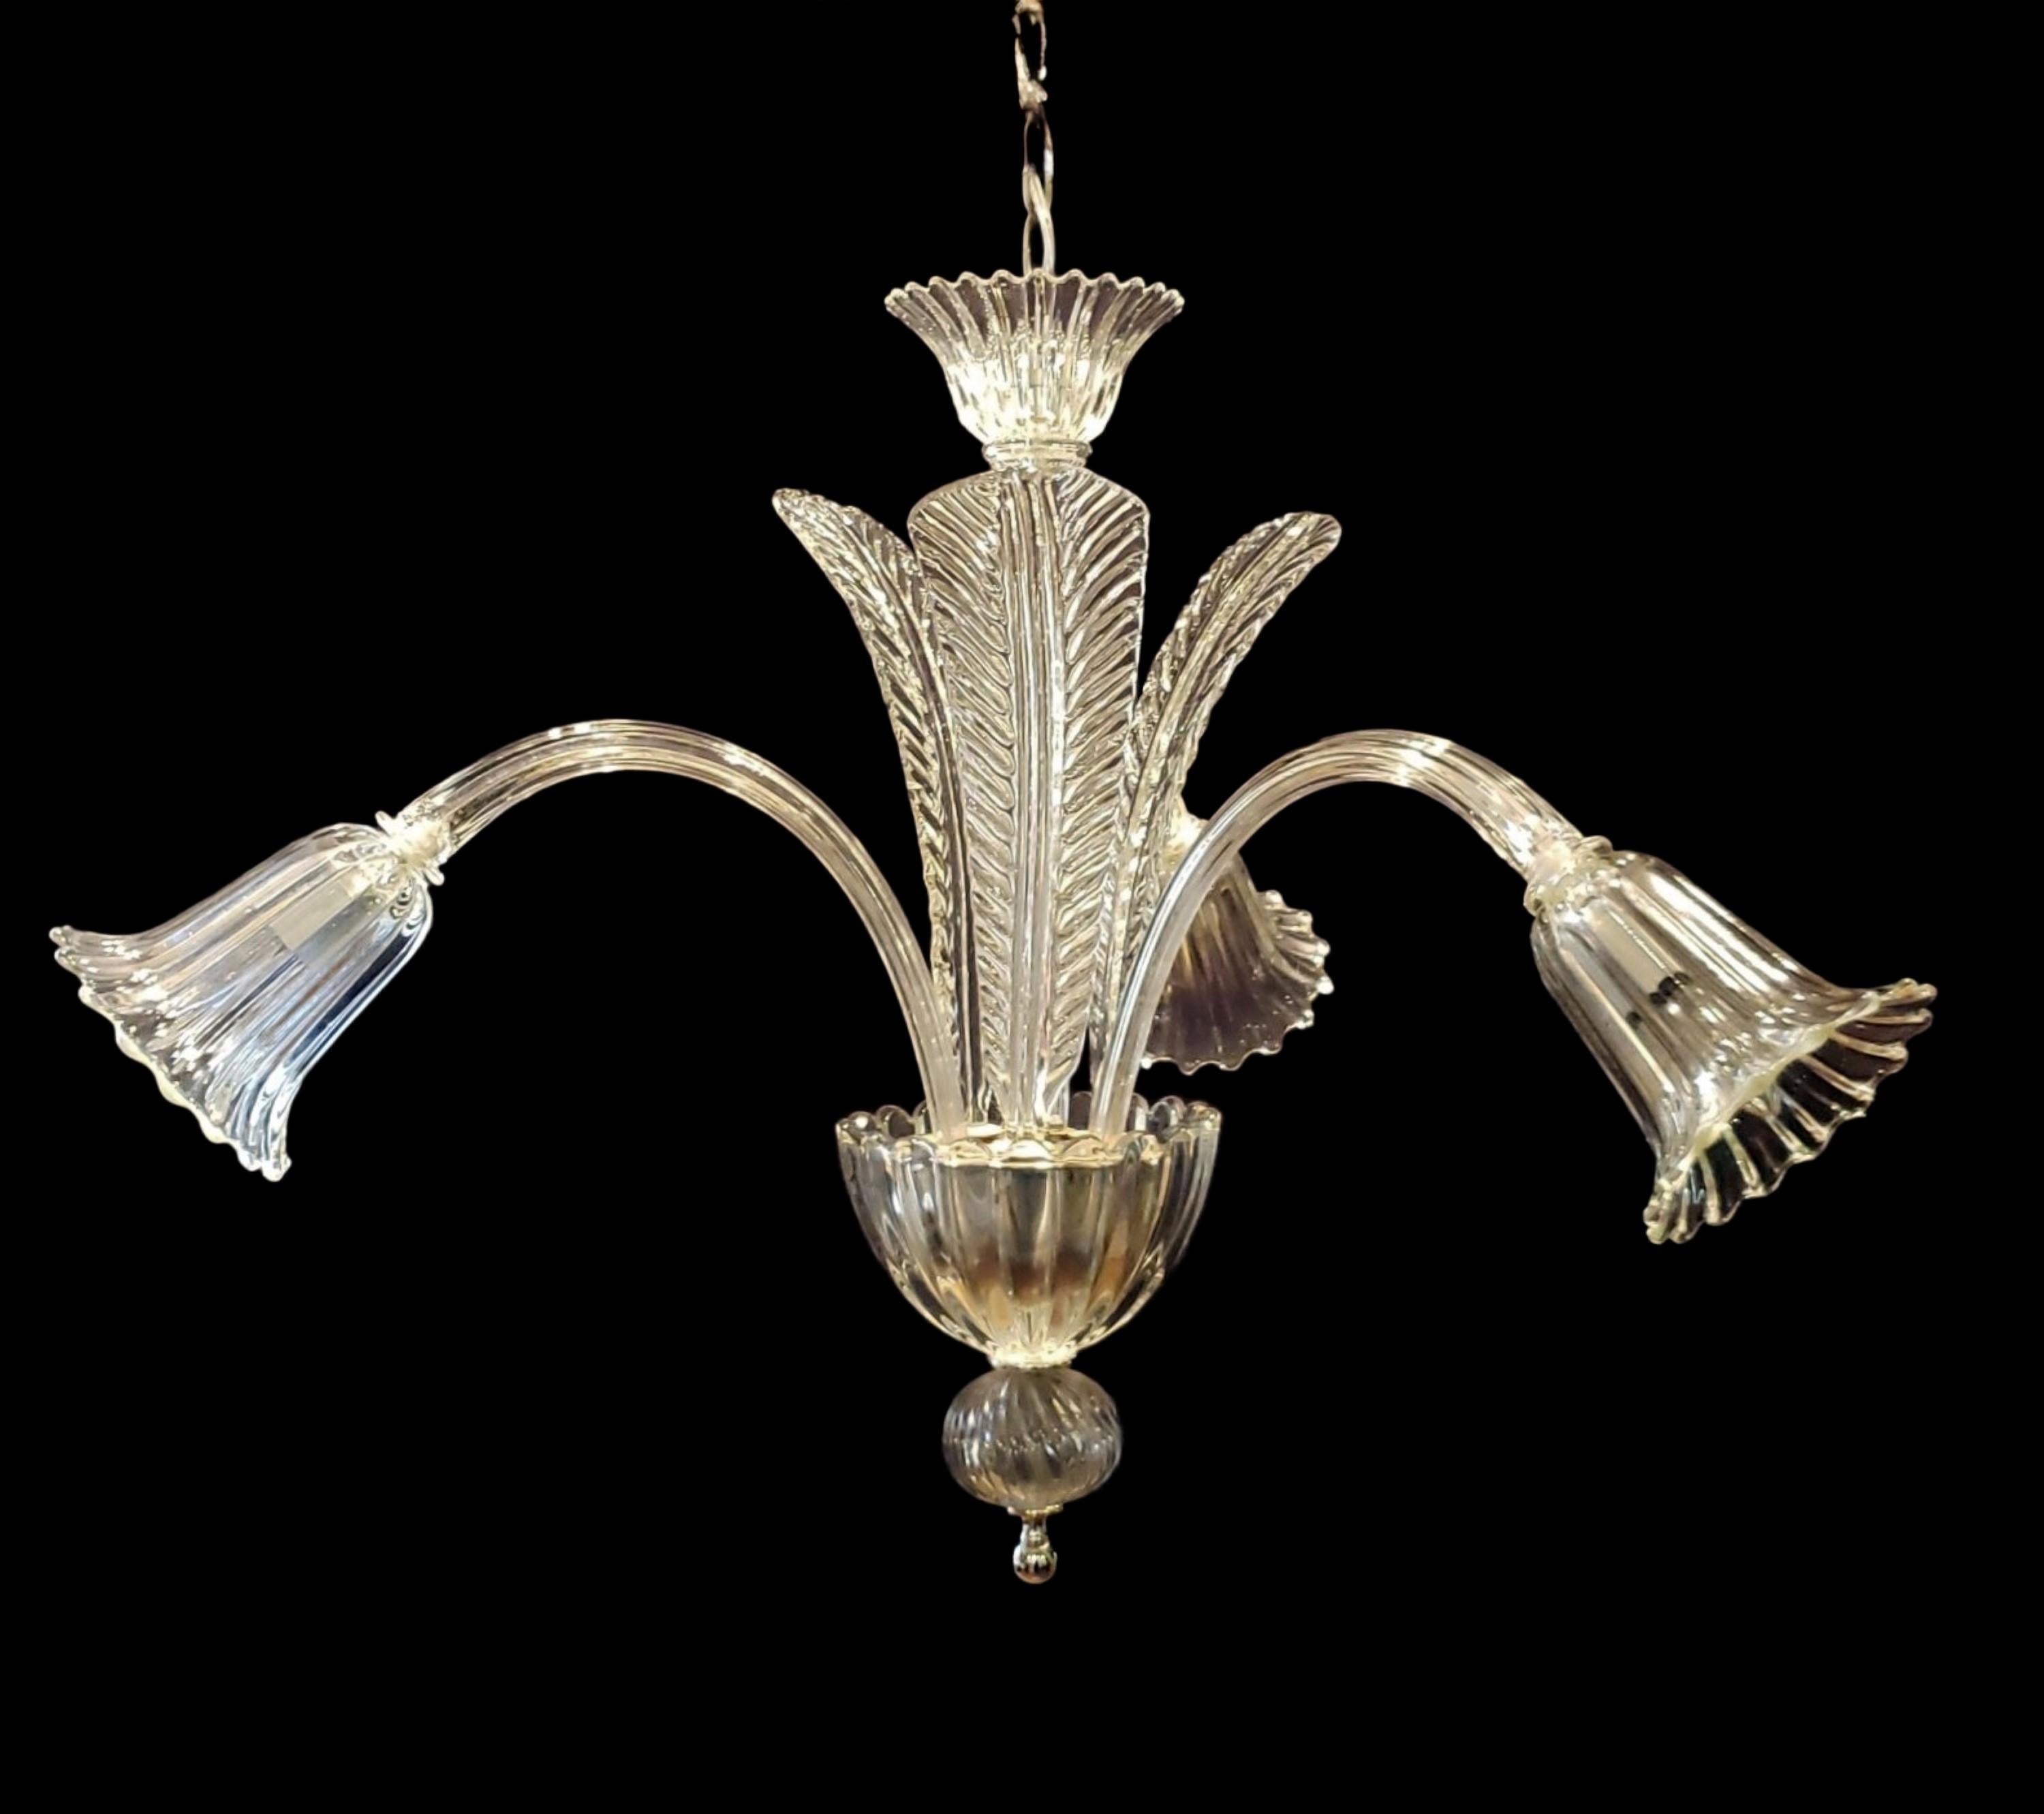 Hand made Murano clear crystal chandelier with three J shaped arms and three up leaves. This comes rewired and ready to install. Ships disassembled. Cleaned and restored. Please note, this item is located in our Scranton, PA location.